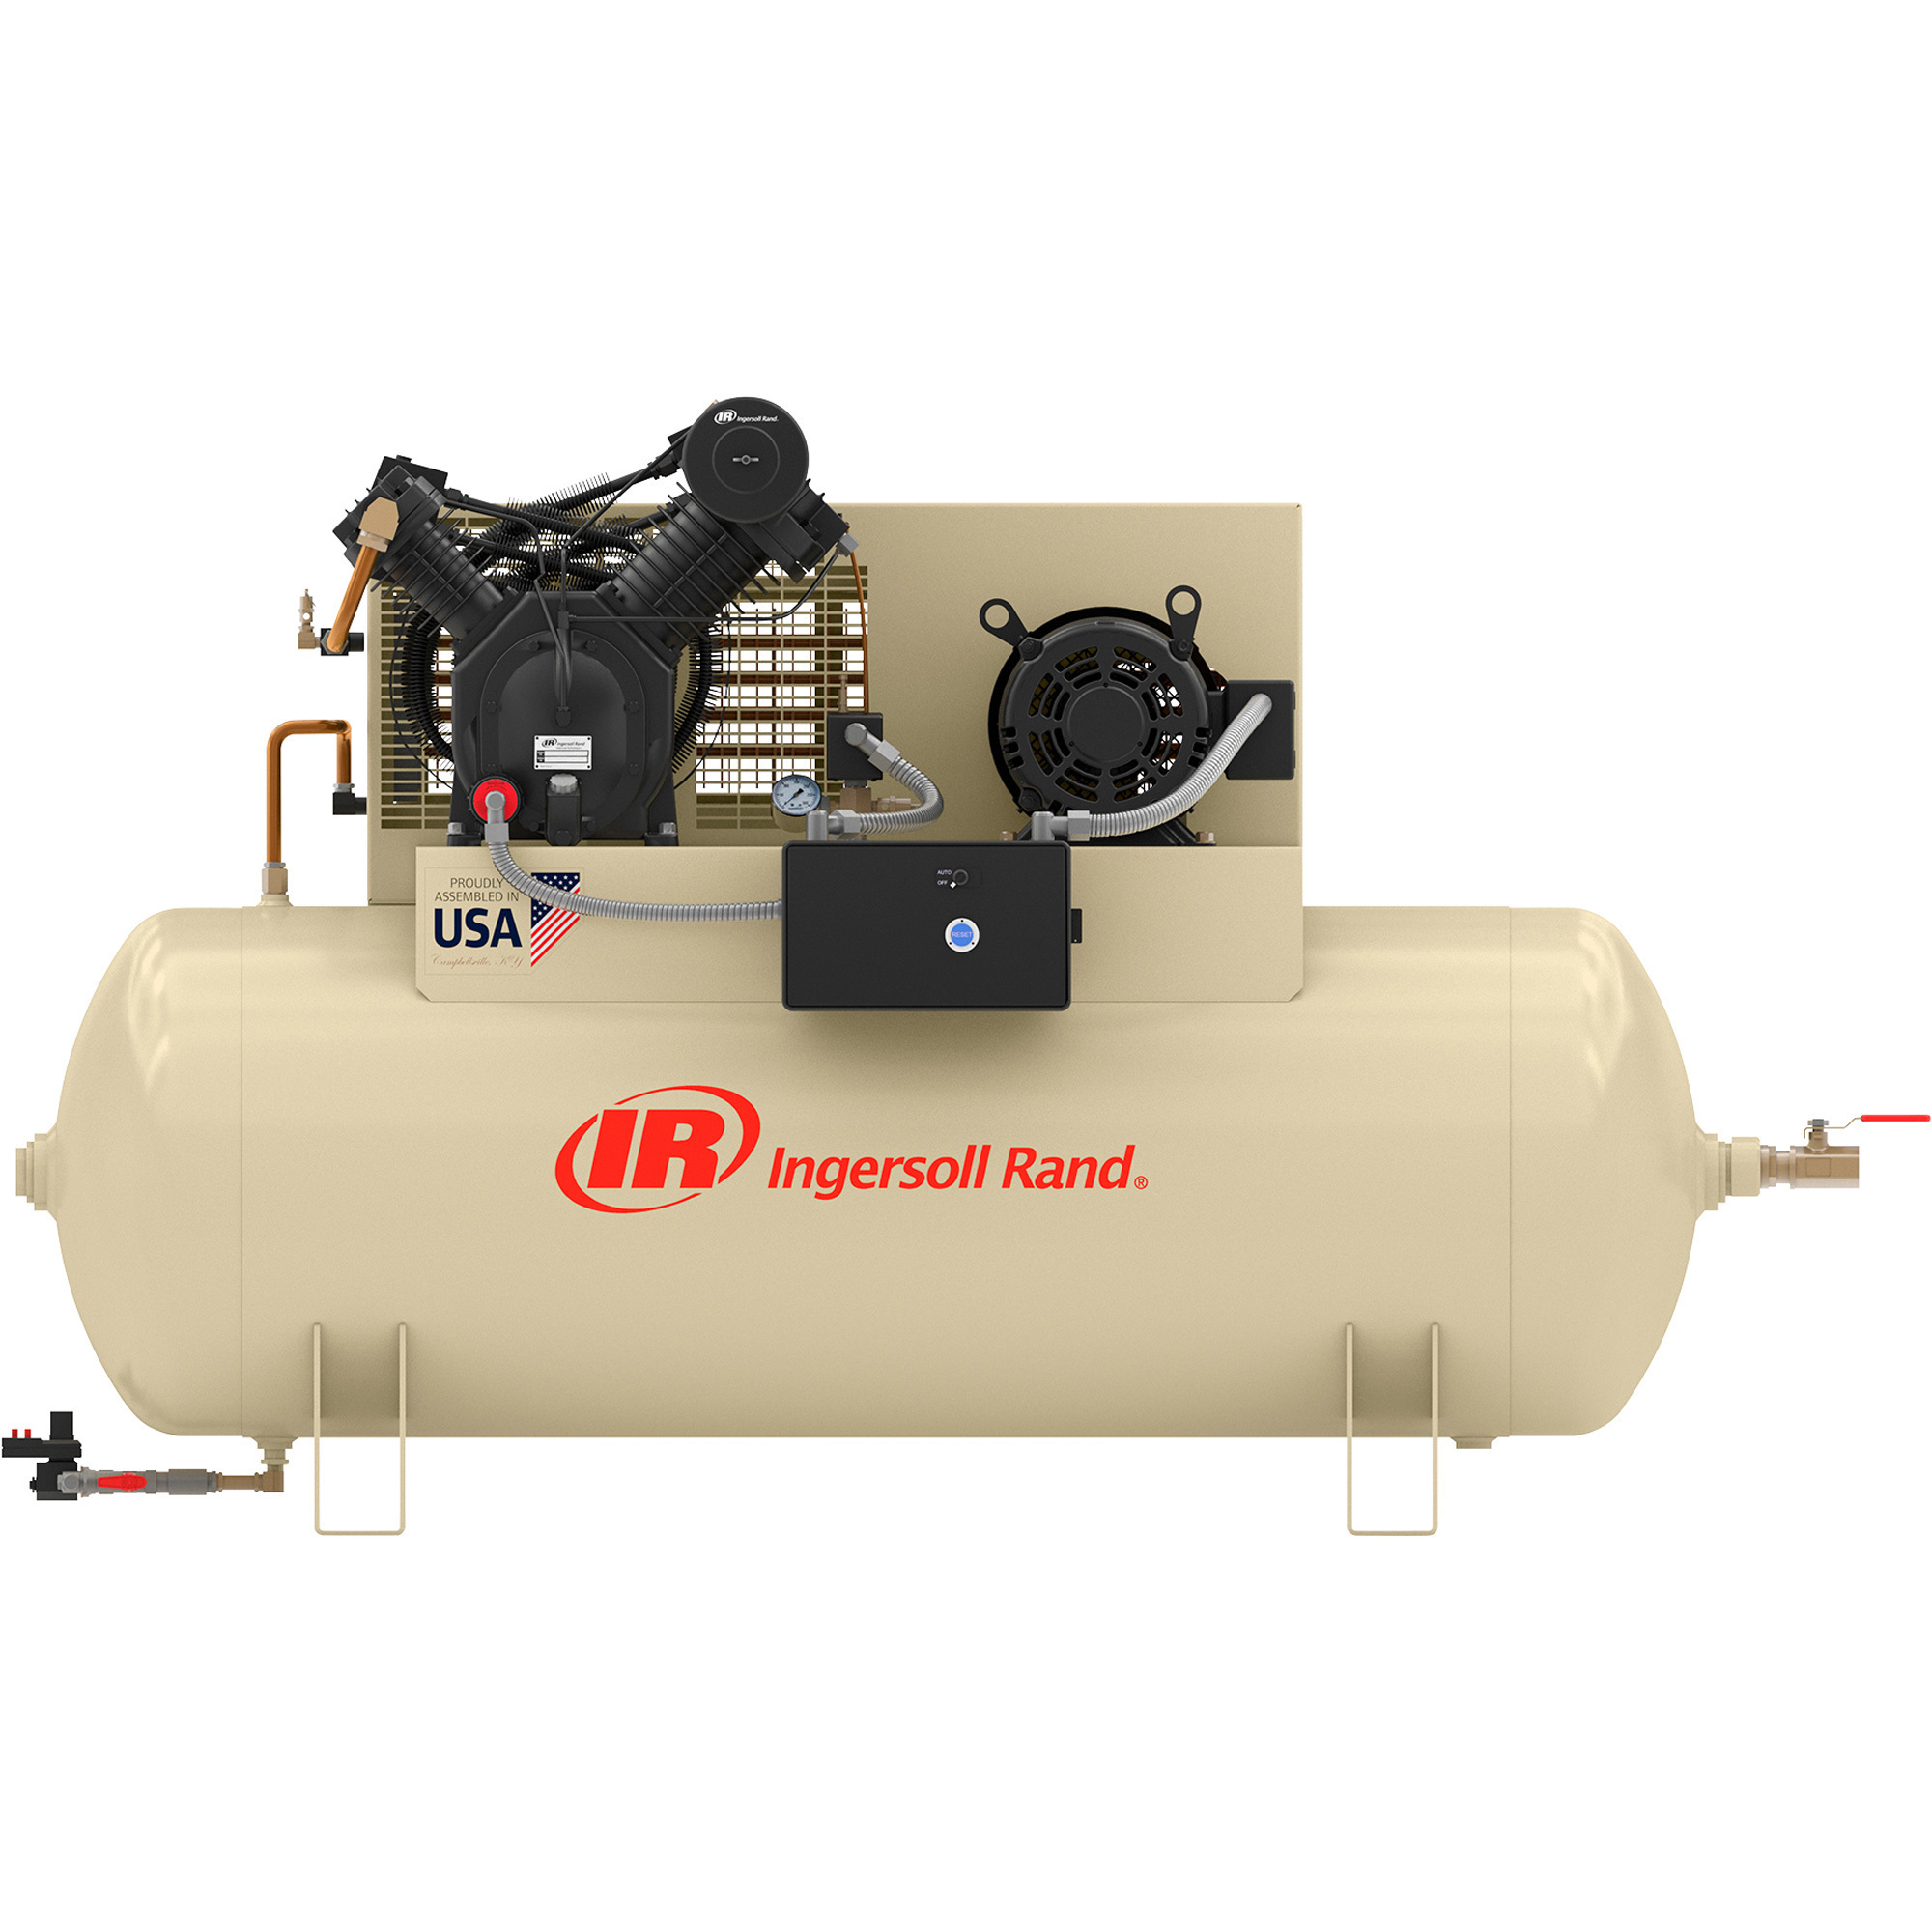 Ingersoll Rand Electric Stationary Air Compressor (Fully Packaged), 15 HP, 200 Volts, 3 Phase, 120 Gallon Horizontal, 50 CFM At 175 PSI, Model 7100E15